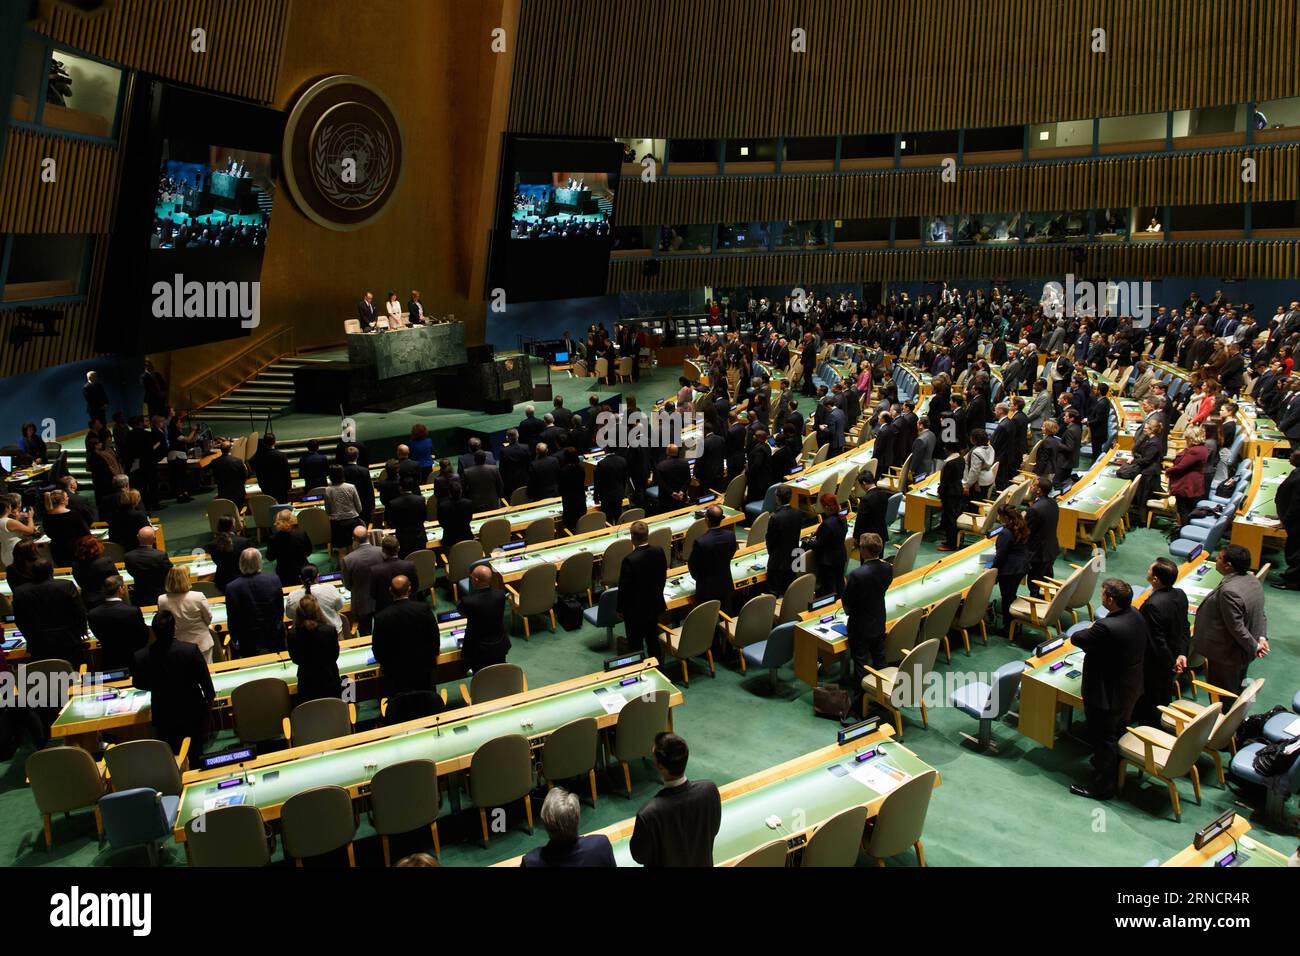 (160419) -- UNITED NATIONS, April 19, 2106 -- Photo taken on April 19, 2016 shows delegates observe a minute of silence during the opening ceremony of UN General Assembly high-level special session on the world drug problem to discuss how to fight against illicit drug use at the UN headquarters in New York. )(dh) UN-GA-WORLD DRUG PROBLEM-SEPCIAL SESSION LixMuzi PUBLICATIONxNOTxINxCHN   160419 United Nations April 19 2106 Photo Taken ON April 19 2016 Shows Delegates Observe a Minutes of Silence during The Opening Ceremony of UN General Assembly High Level Special Session ON The World Drug Probl Stock Photo